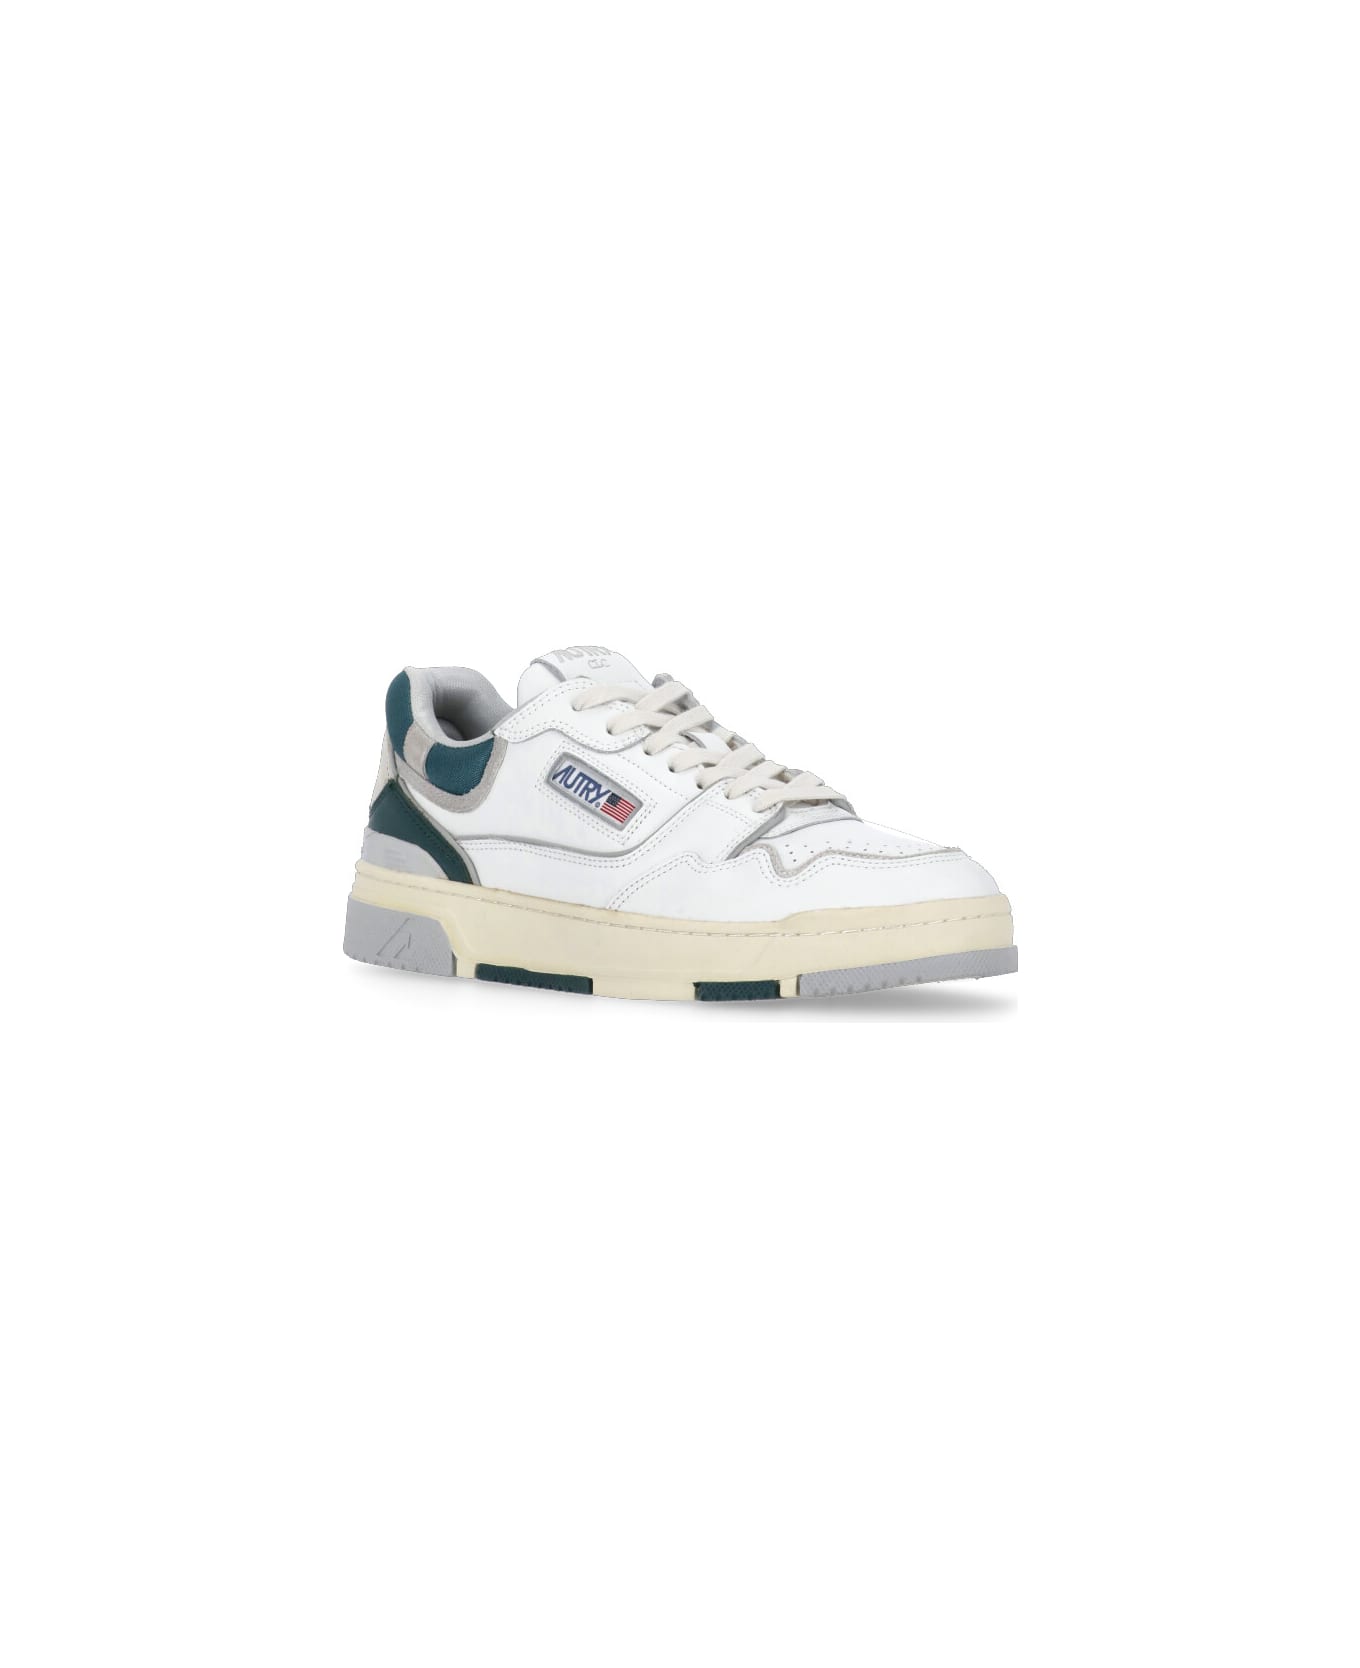 Autry Clc Leather Trainers - White/green スニーカー